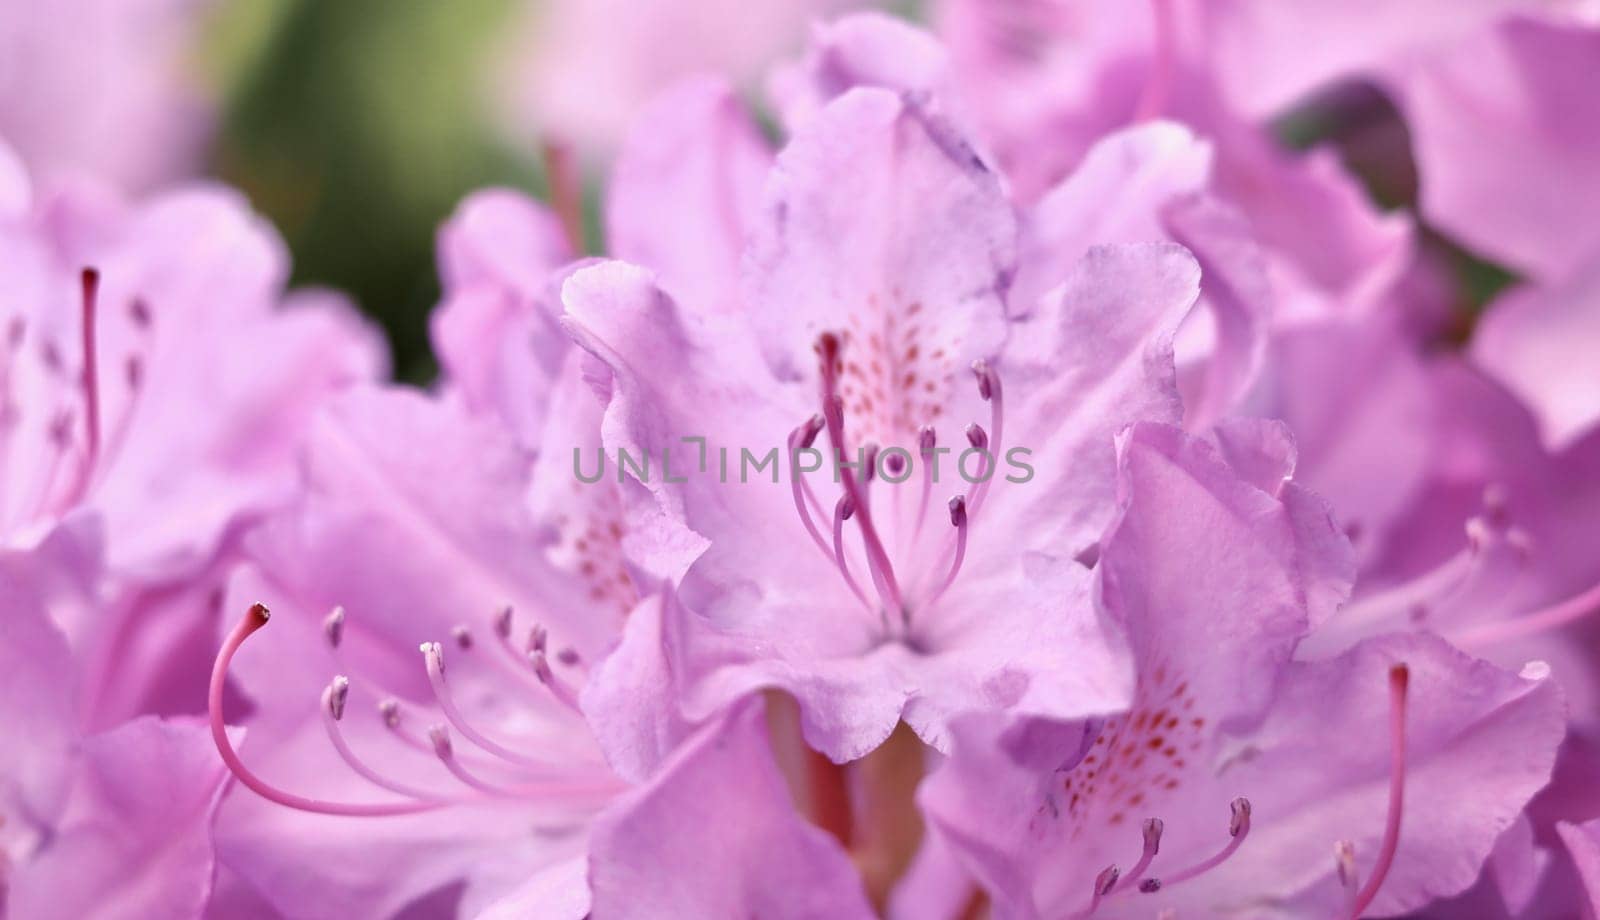 Pink Rhododendron flower petals. Macro flowers background for holiday brand design